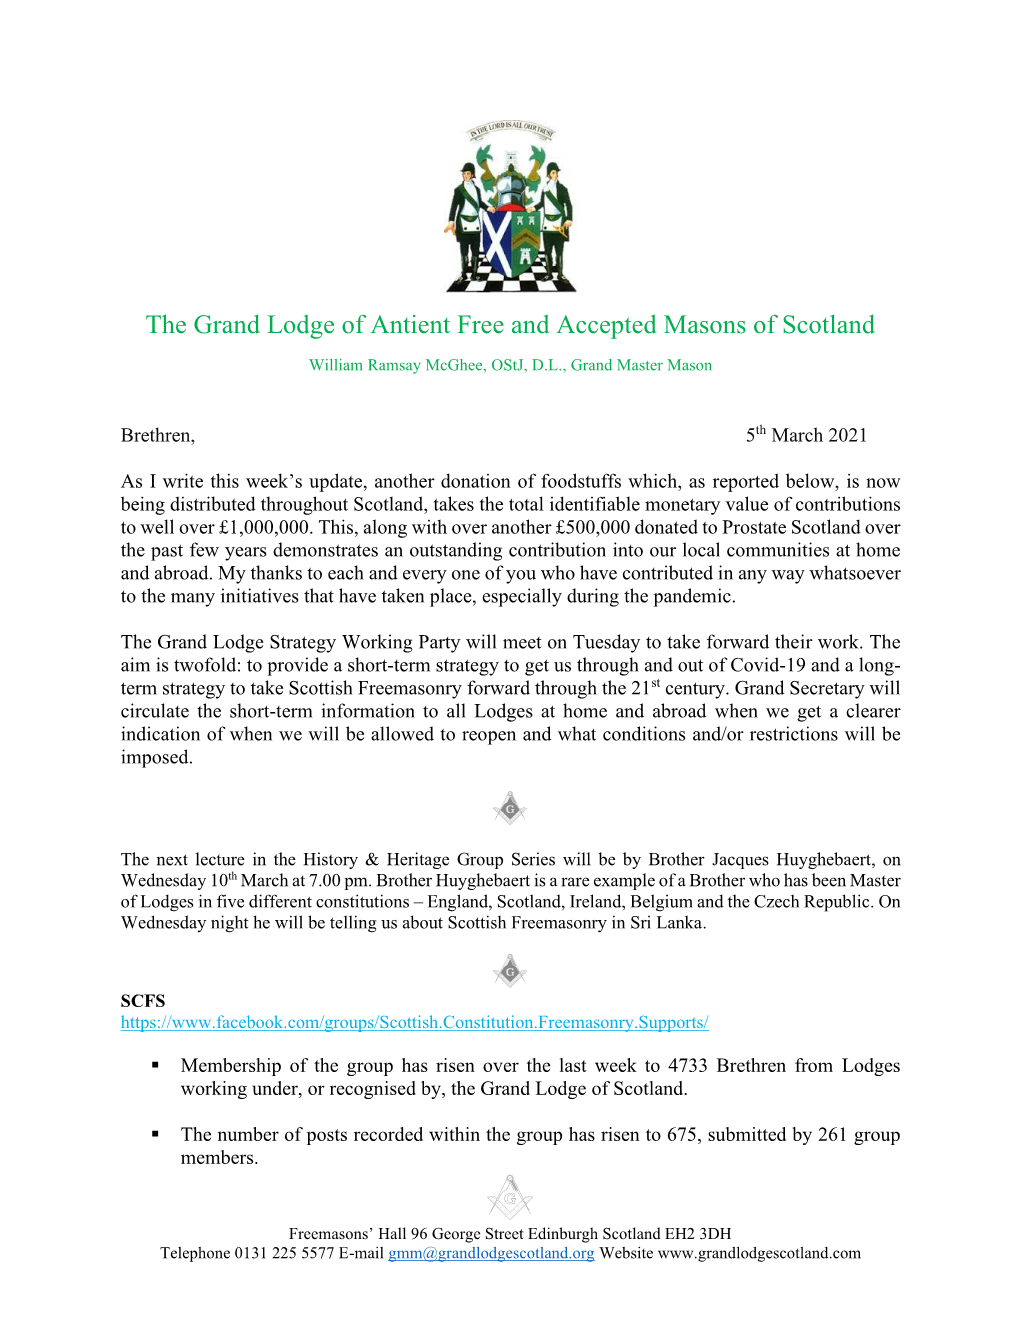 The Grand Lodge of Antient Free and Accepted Masons of Scotland